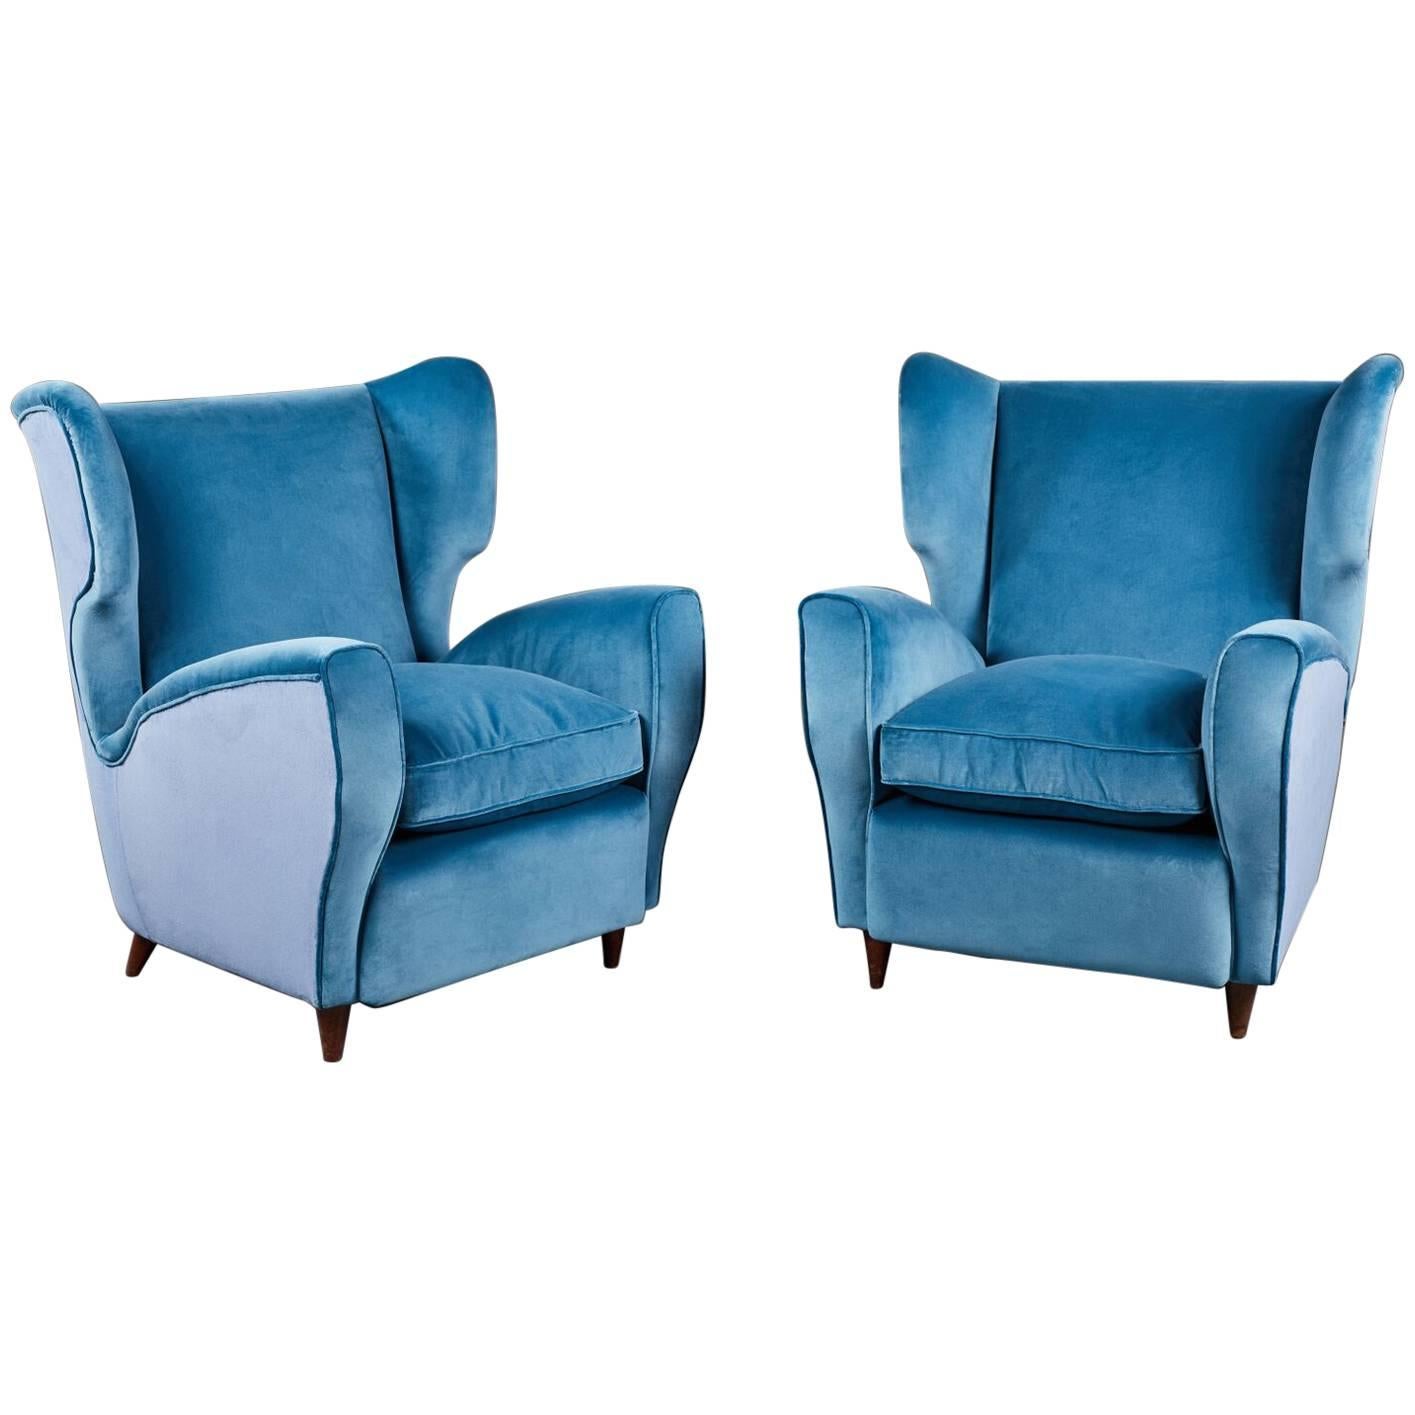 Pair of Italian Mid-20th Century Wingback Chairs in Two Tones of Velvet For Sale